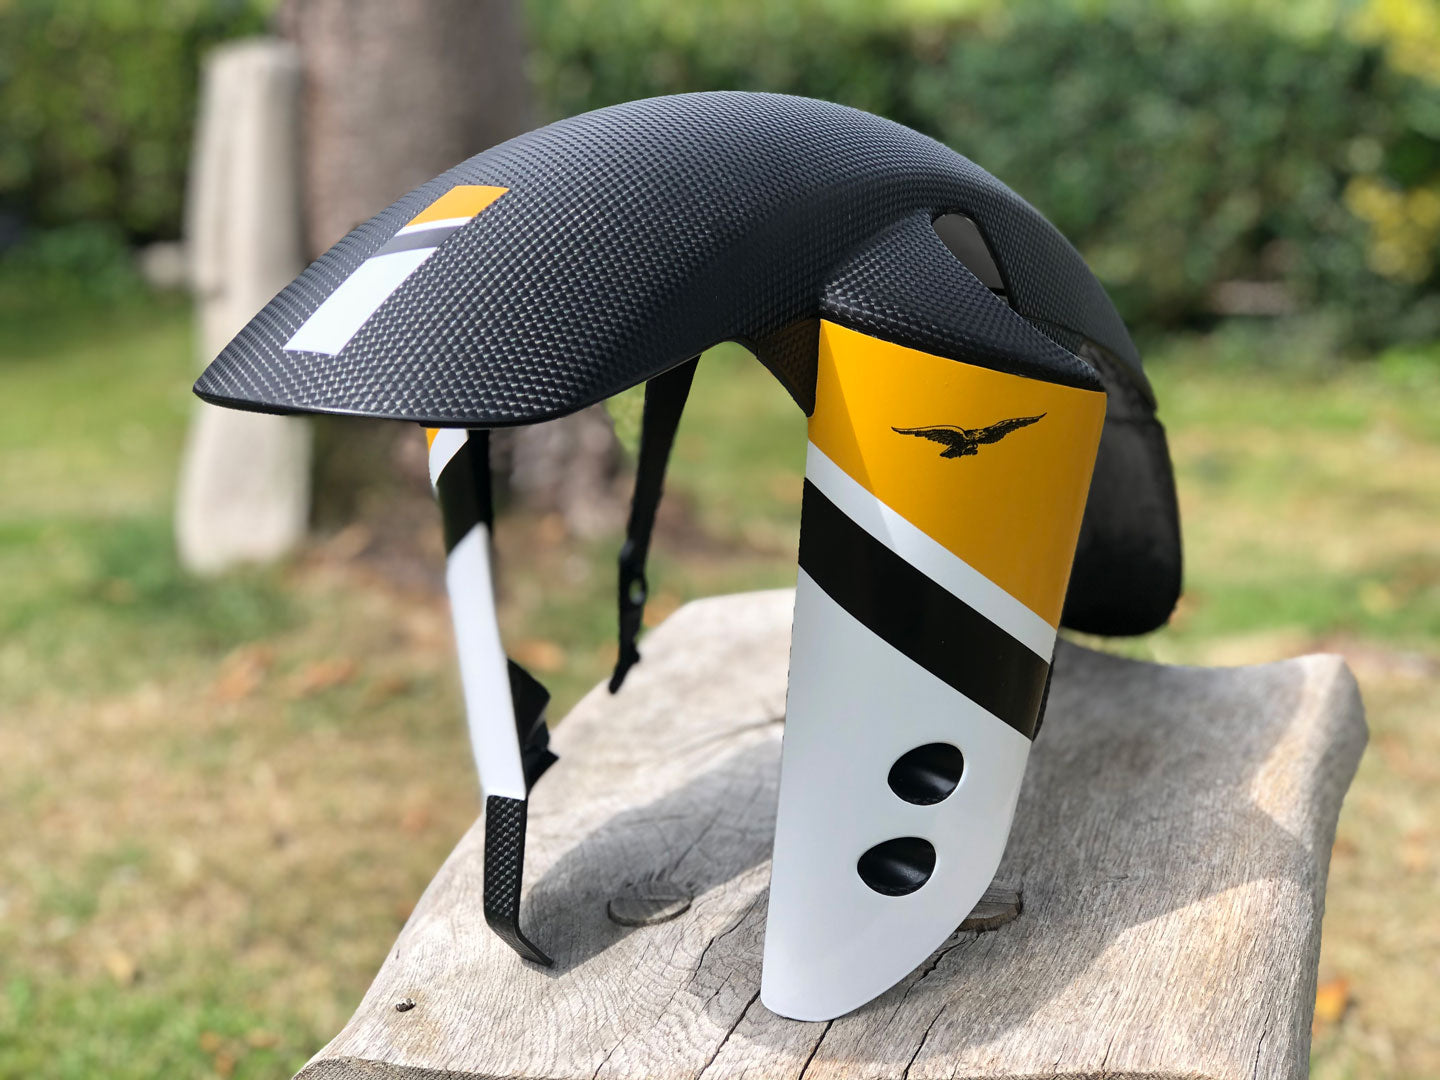 These decals are designed to compliment the Aprilia Caponord Rally front mudguard, often bought as an aftermarket accessory to protect the engine area of the V85TT.